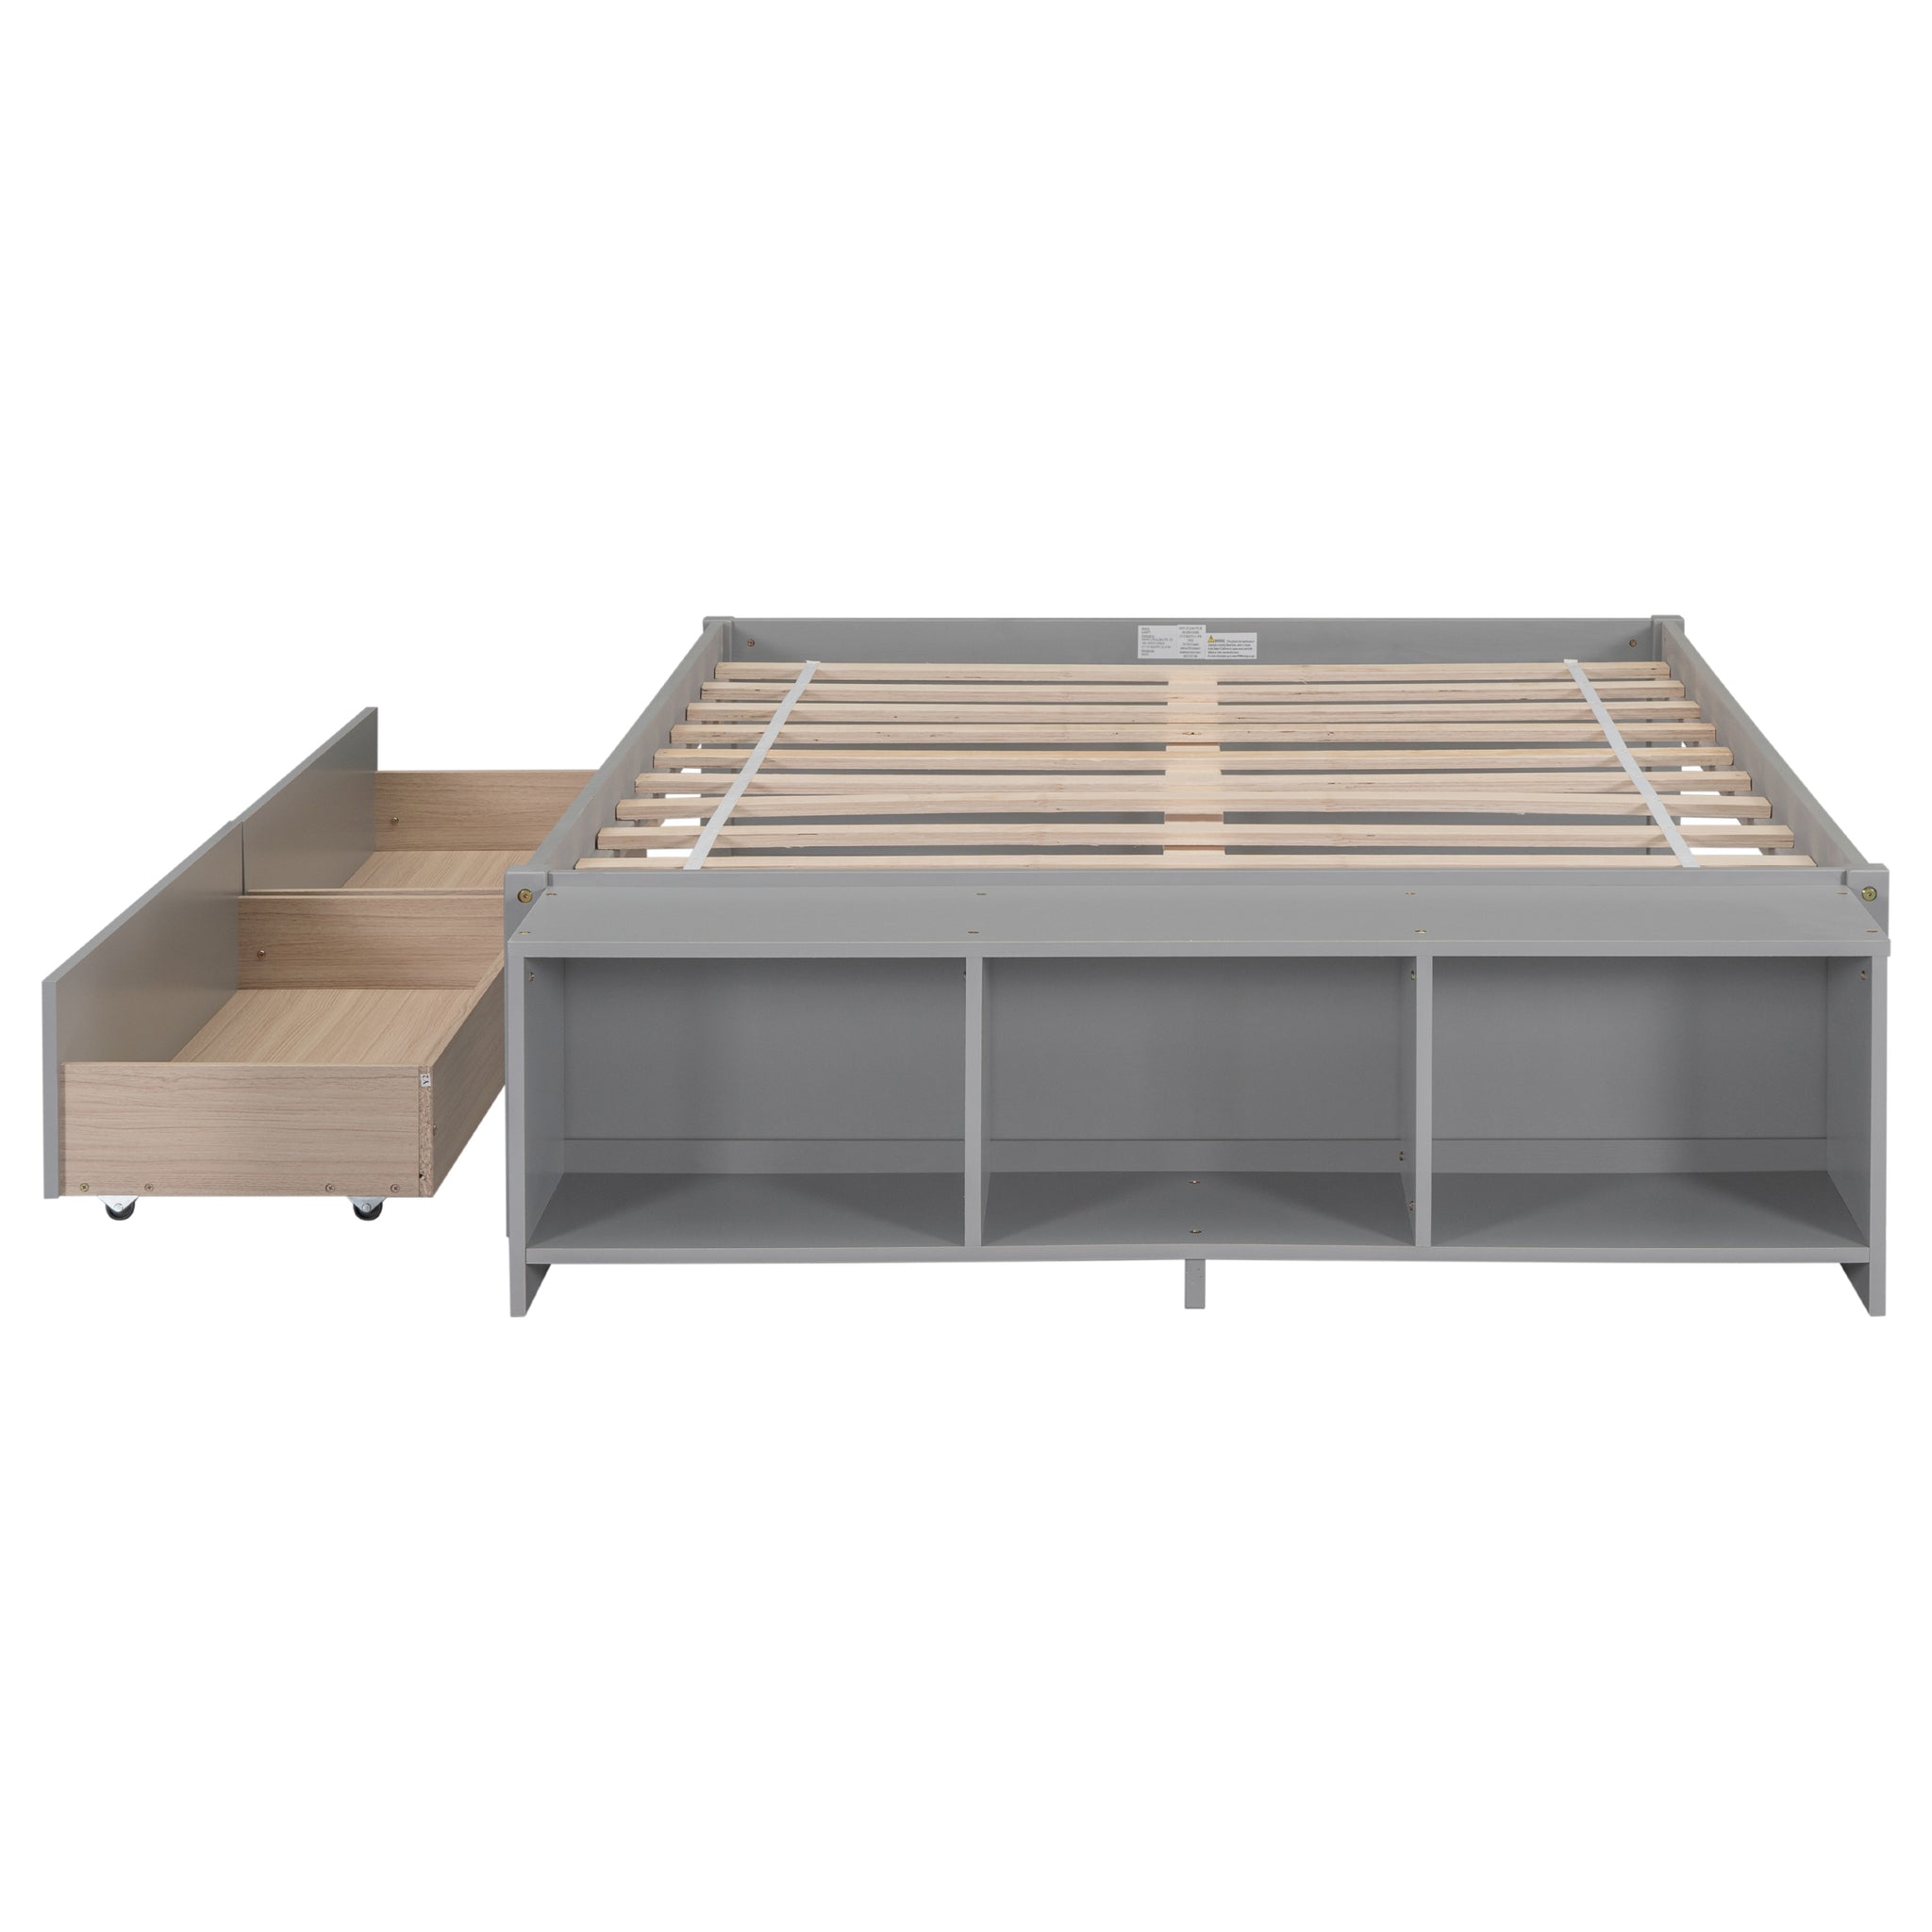 Full Size Bed with Storage Case, 2 Storage drawers full-grey-wood-bedroom-american design-pine-pine